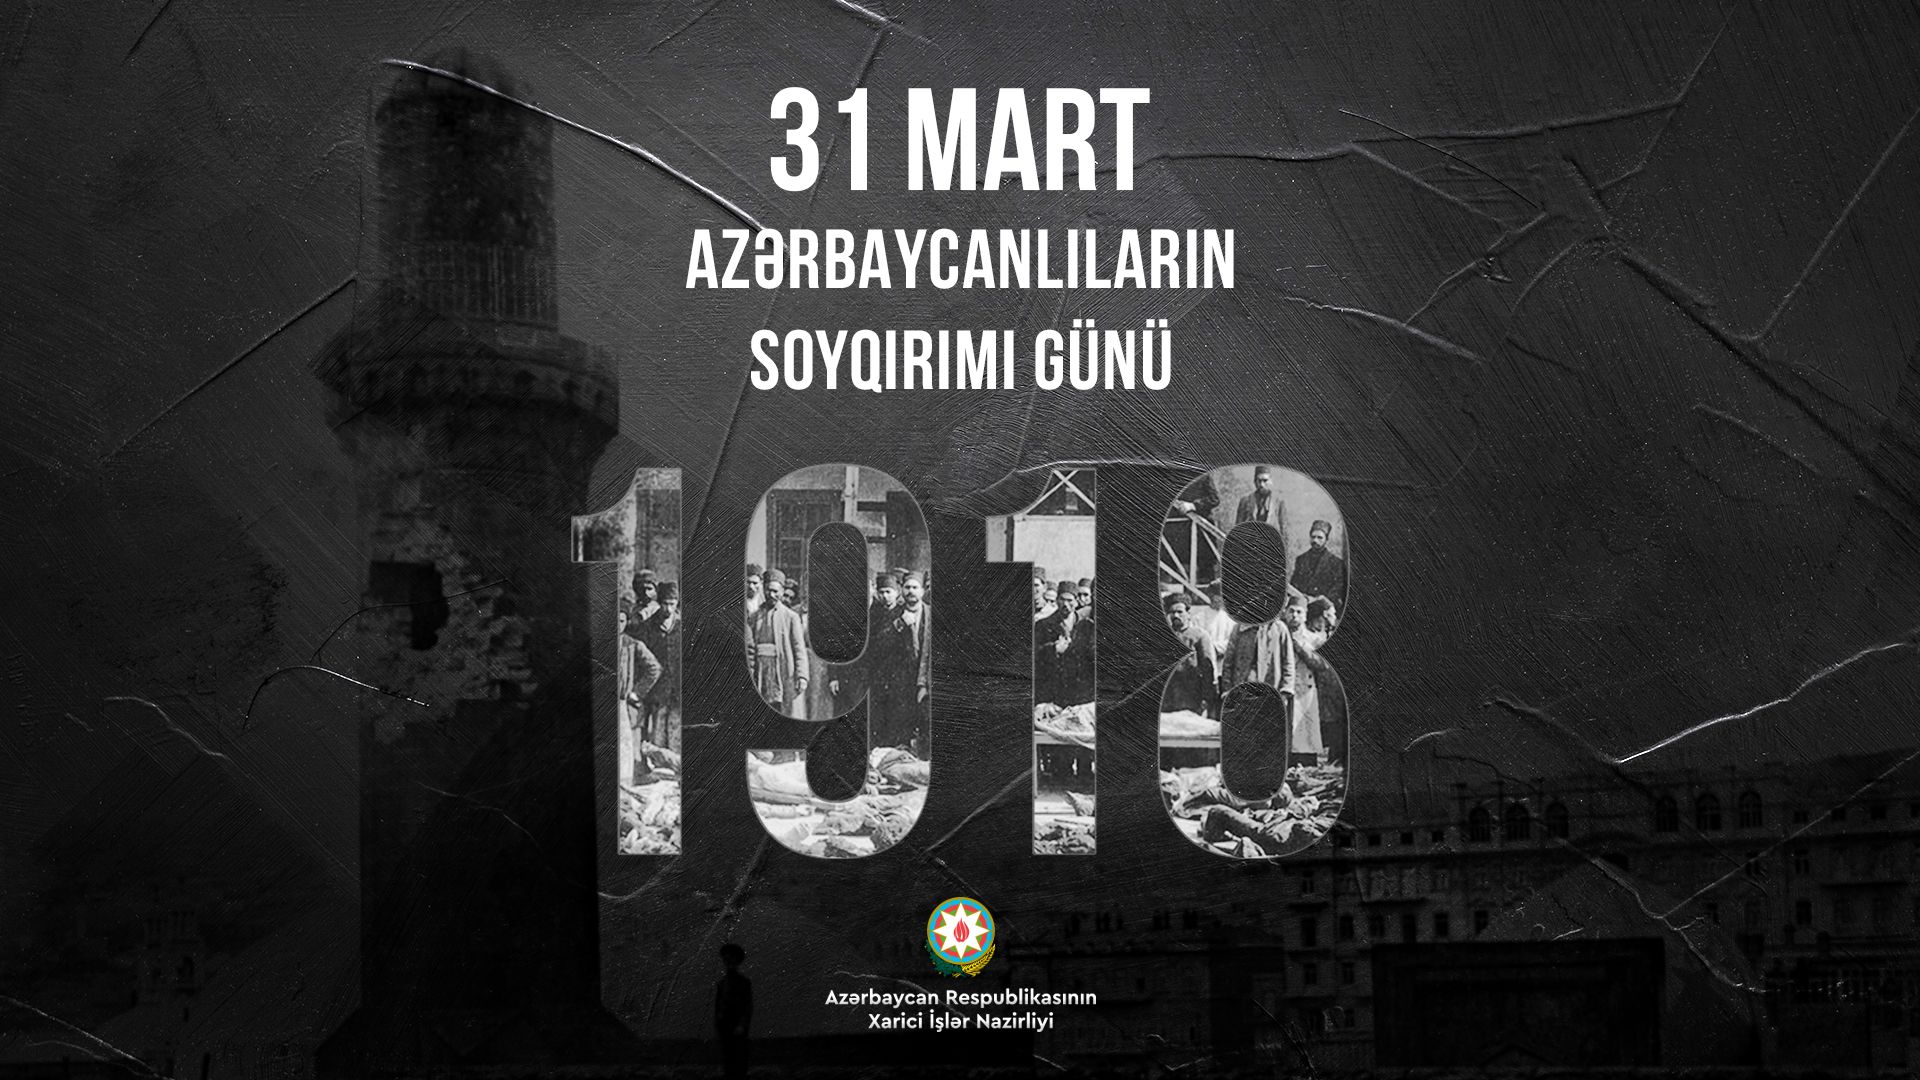 Azerbaijani Foreign Ministry commemorates victims of March 1918 massacres